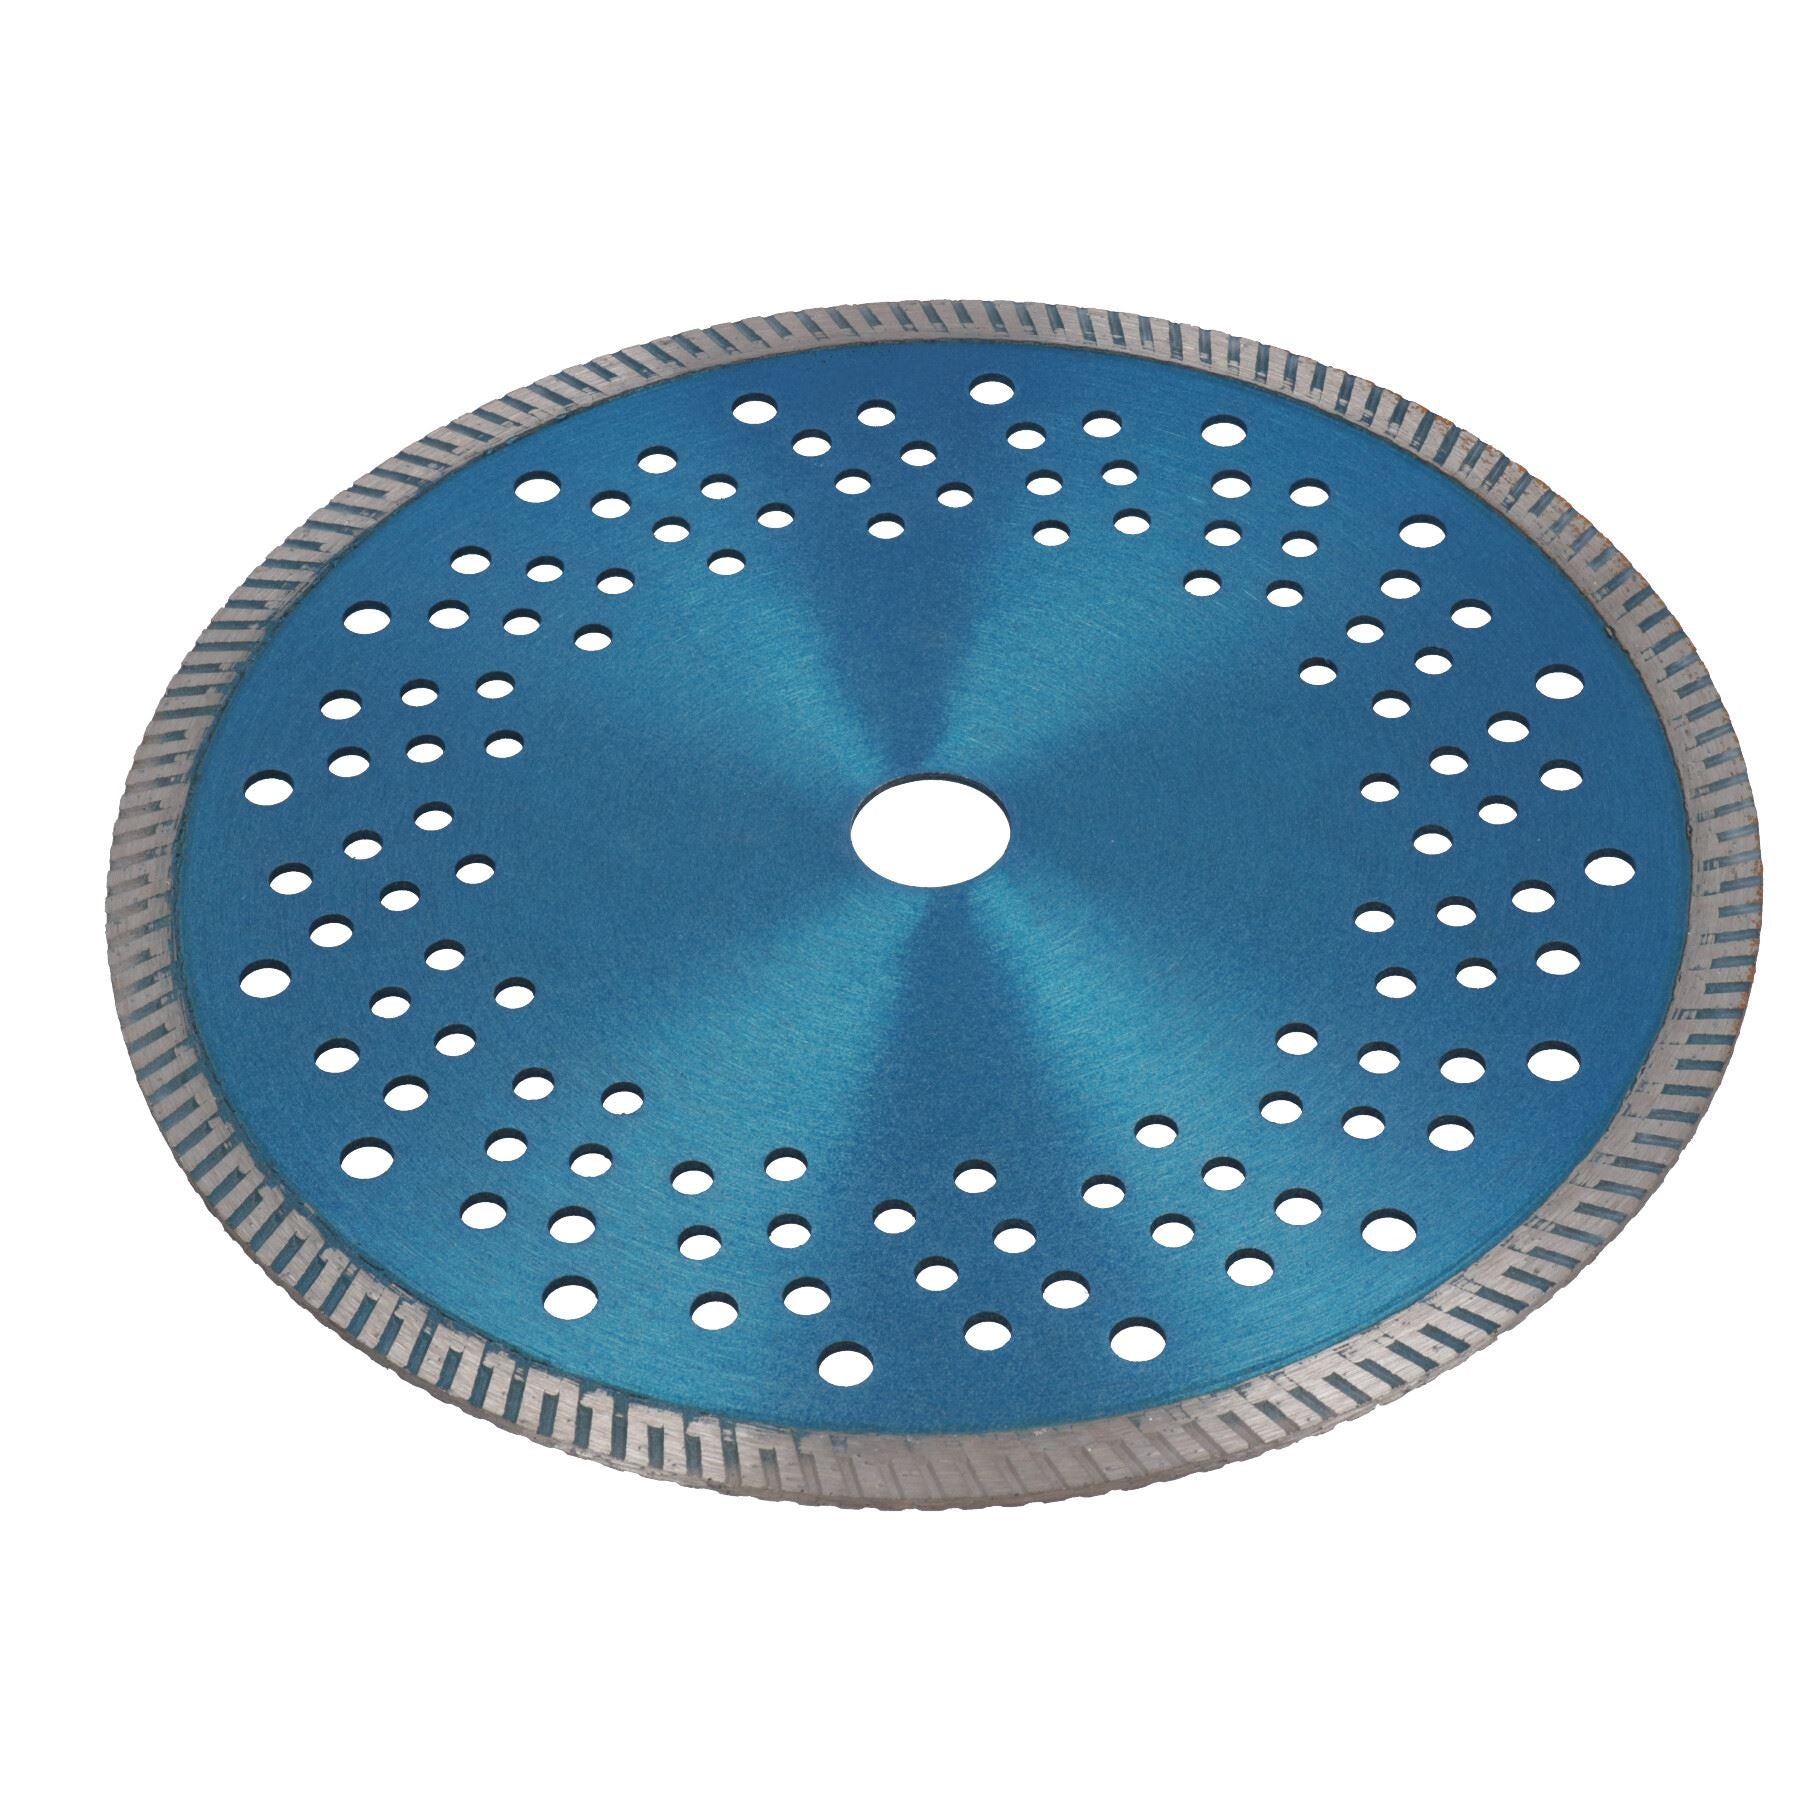 9in / 230mm Dry and Wet Turbo Cutting Disc Porcelain Ceramic Granite Marble